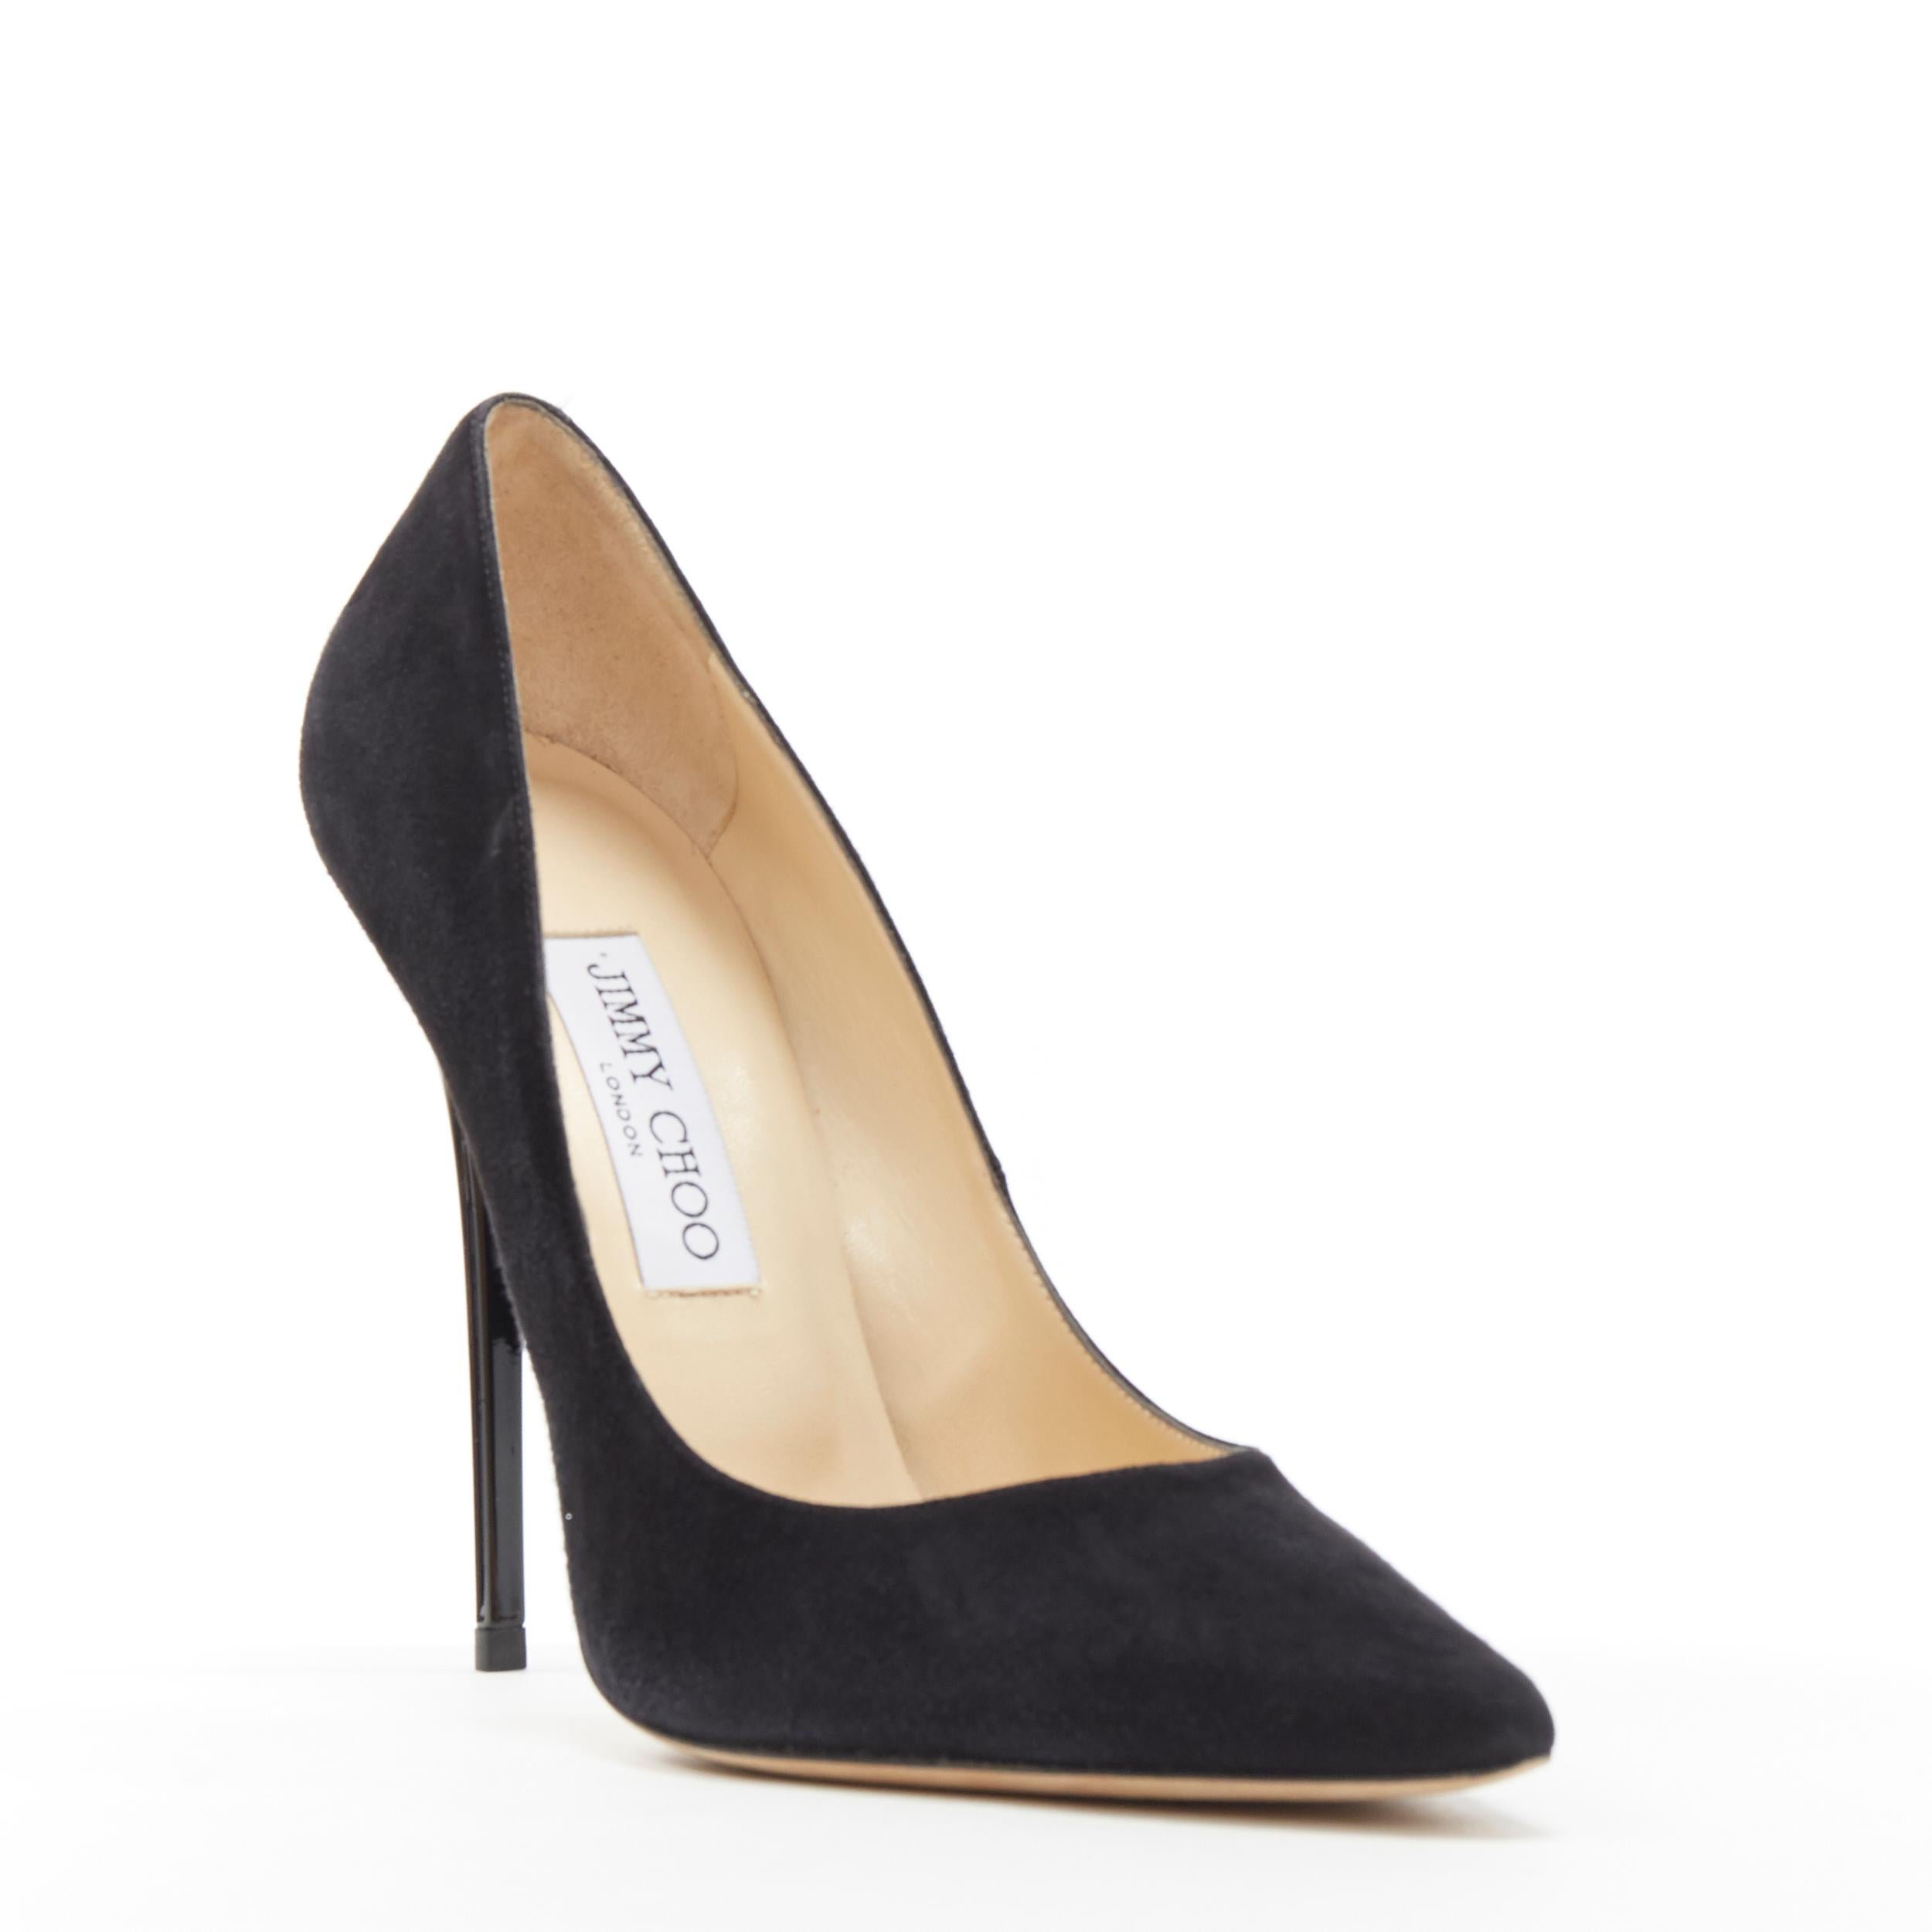 new JIMMY CHOO Anouk 120 black suede pointy toe pigalle stiletto pump EU38
Brand: Jimmy Choo
Designer: Jimmy Choo
Model Name / Style: Anouk 120
Material: Suede
Color: Black
Pattern: Solid
Closure: Slip on
Extra Detail: Suede leaher upper. Shiney